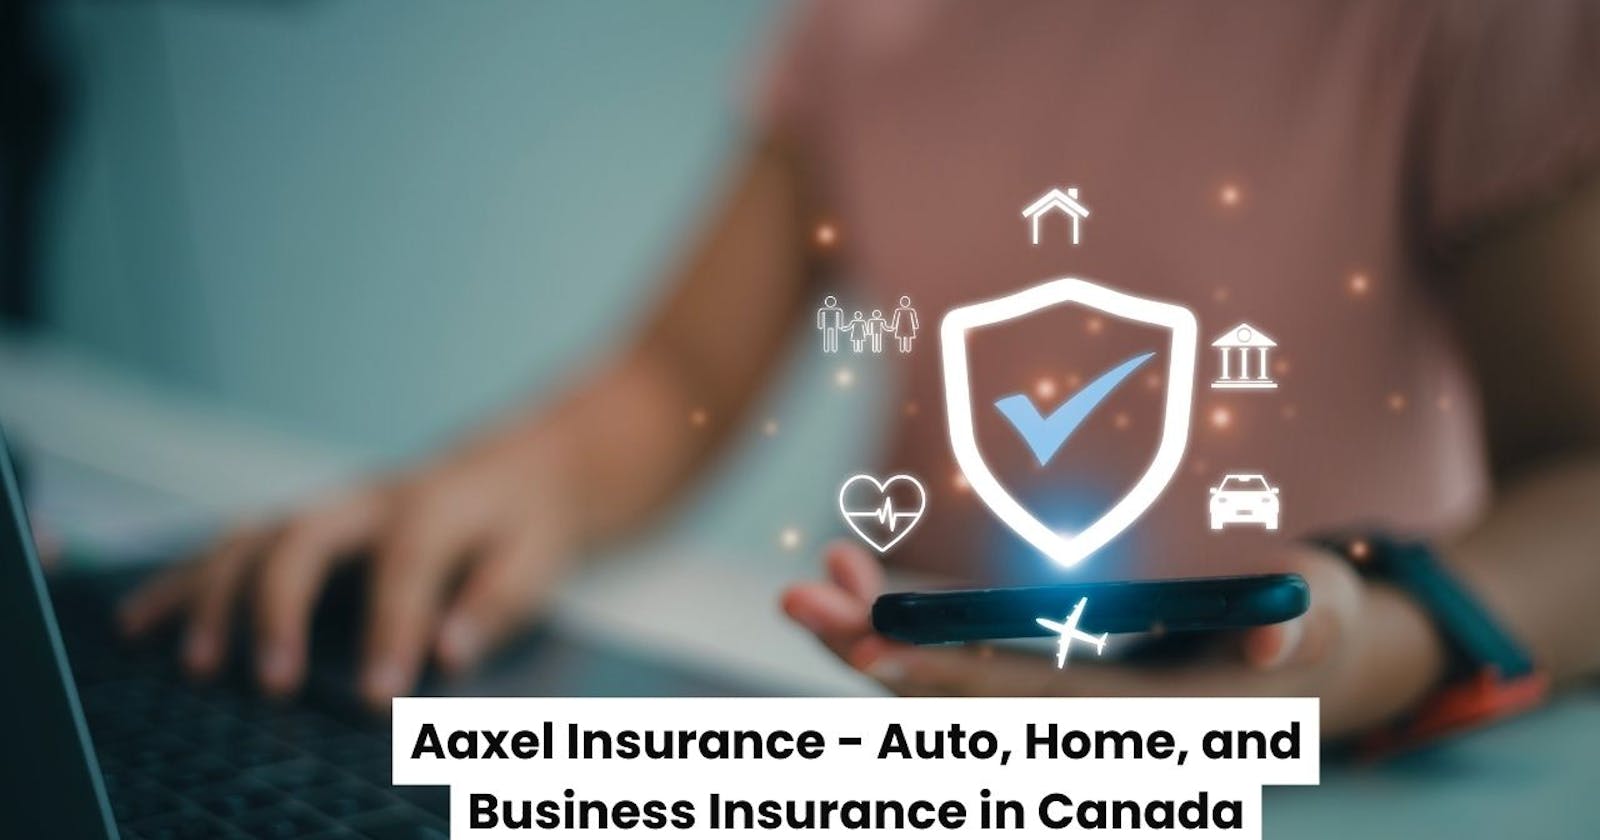 Aaxel Insurance - Auto, Home, and Business Insurance in Canada